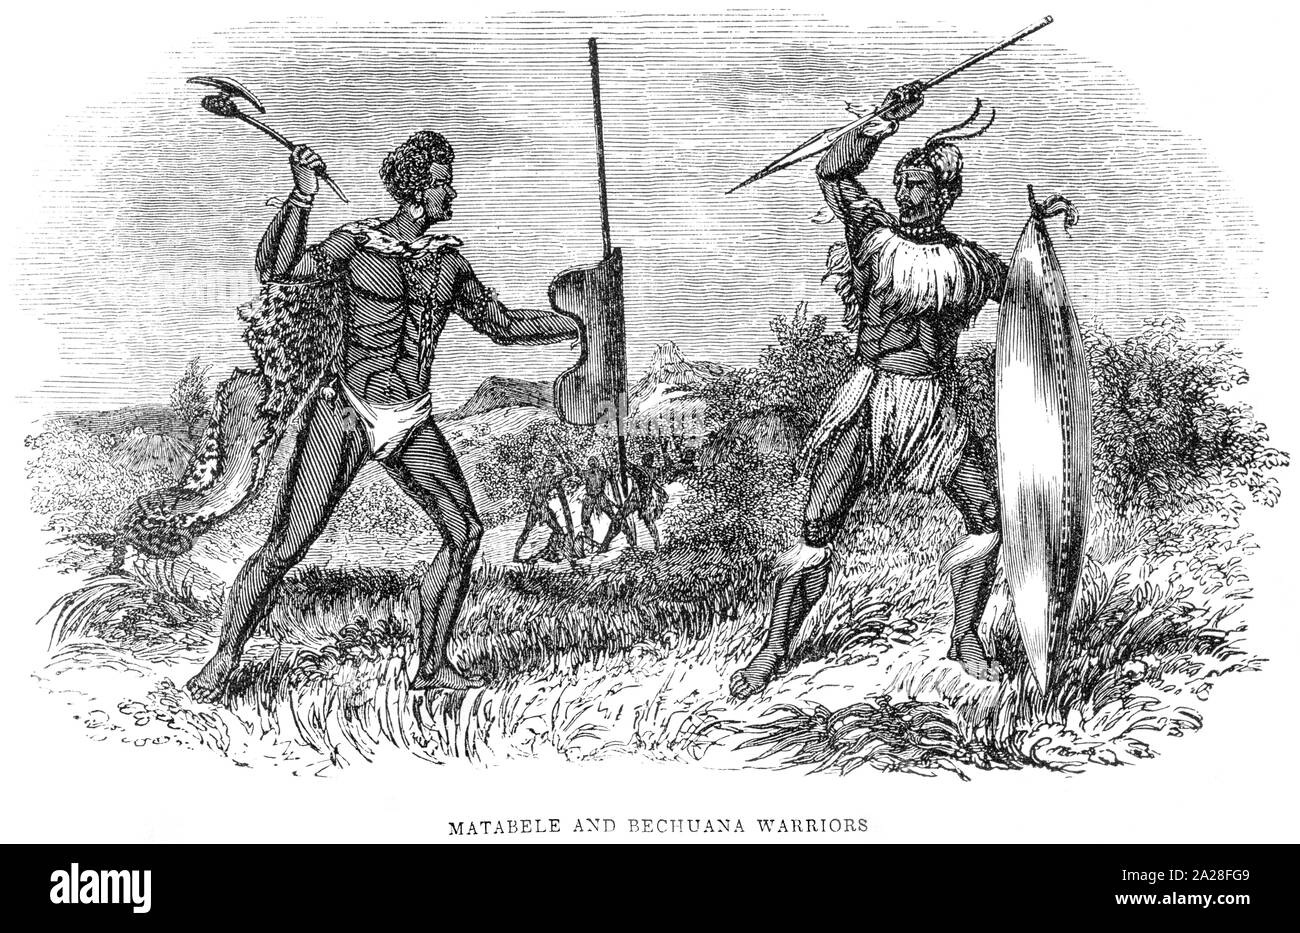 An illustration of Matabele and Bechuana Warriors in South Africa scanned at high resolution from a book by Robert Moffat  printed in 1842. Stock Photo